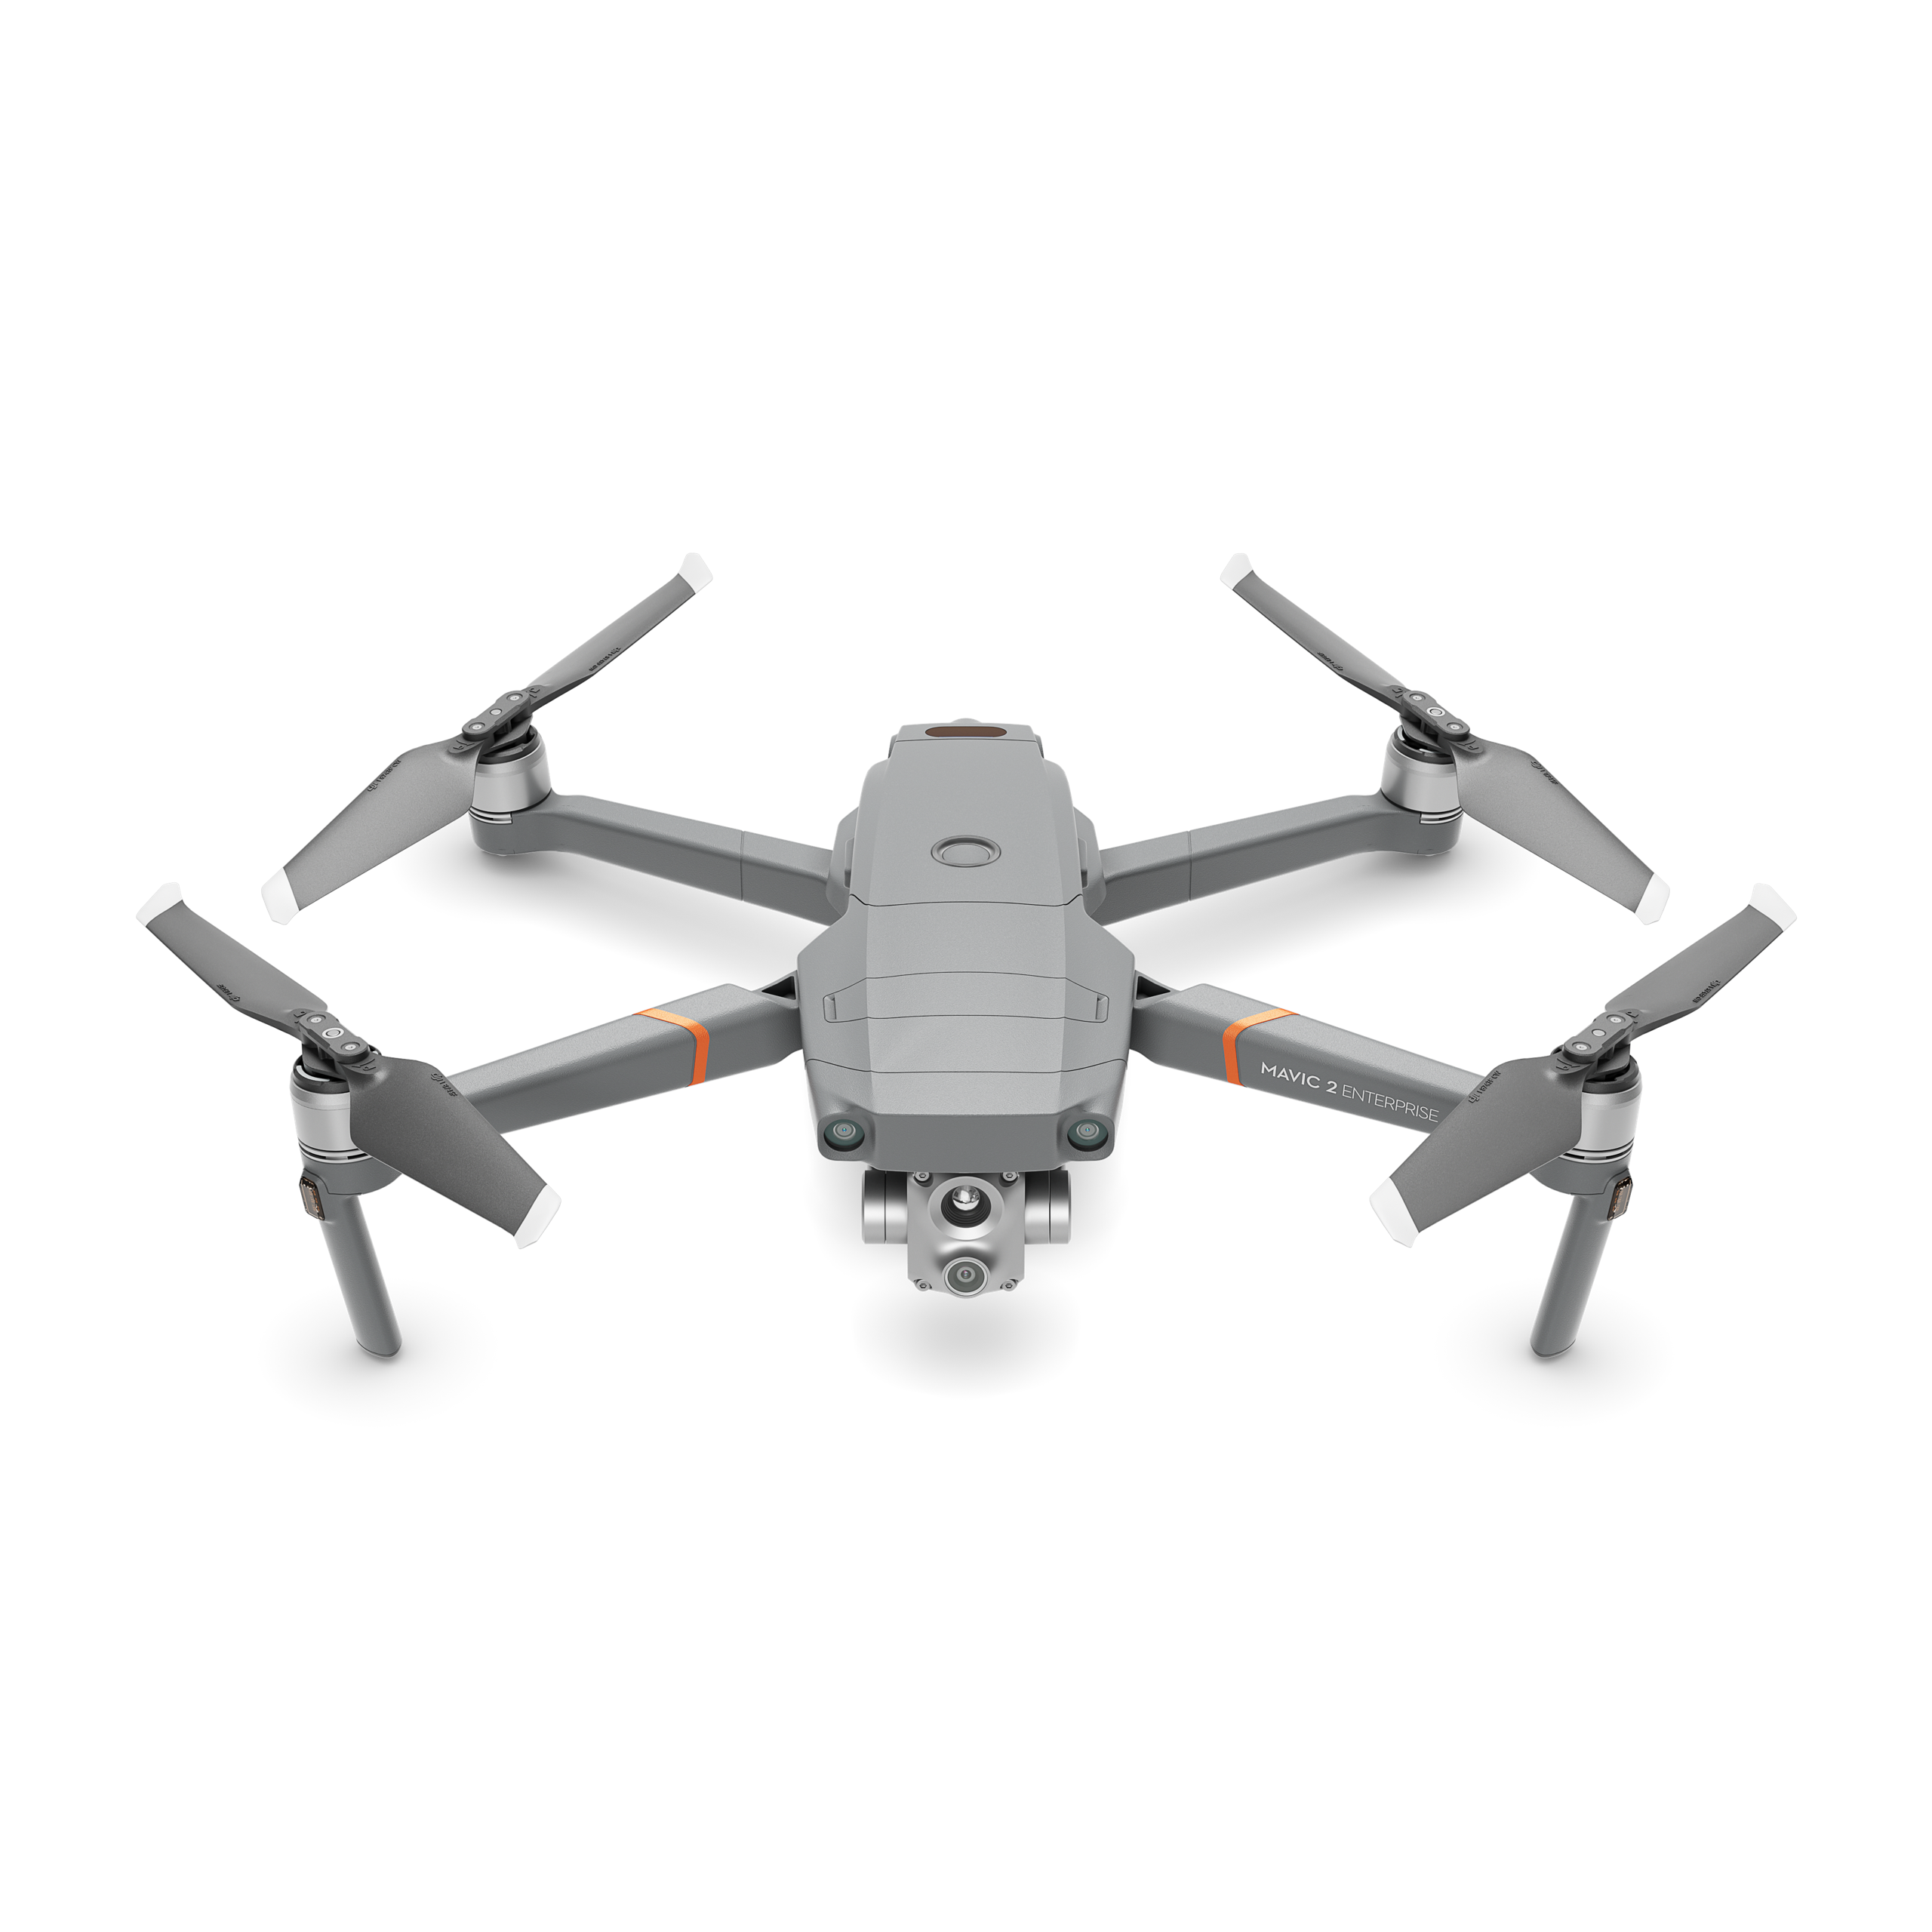 http://www.botsanddrones.biz/buy_sell_used_drones/uk/storage/app/public/product/image/1678963941Commercial.png